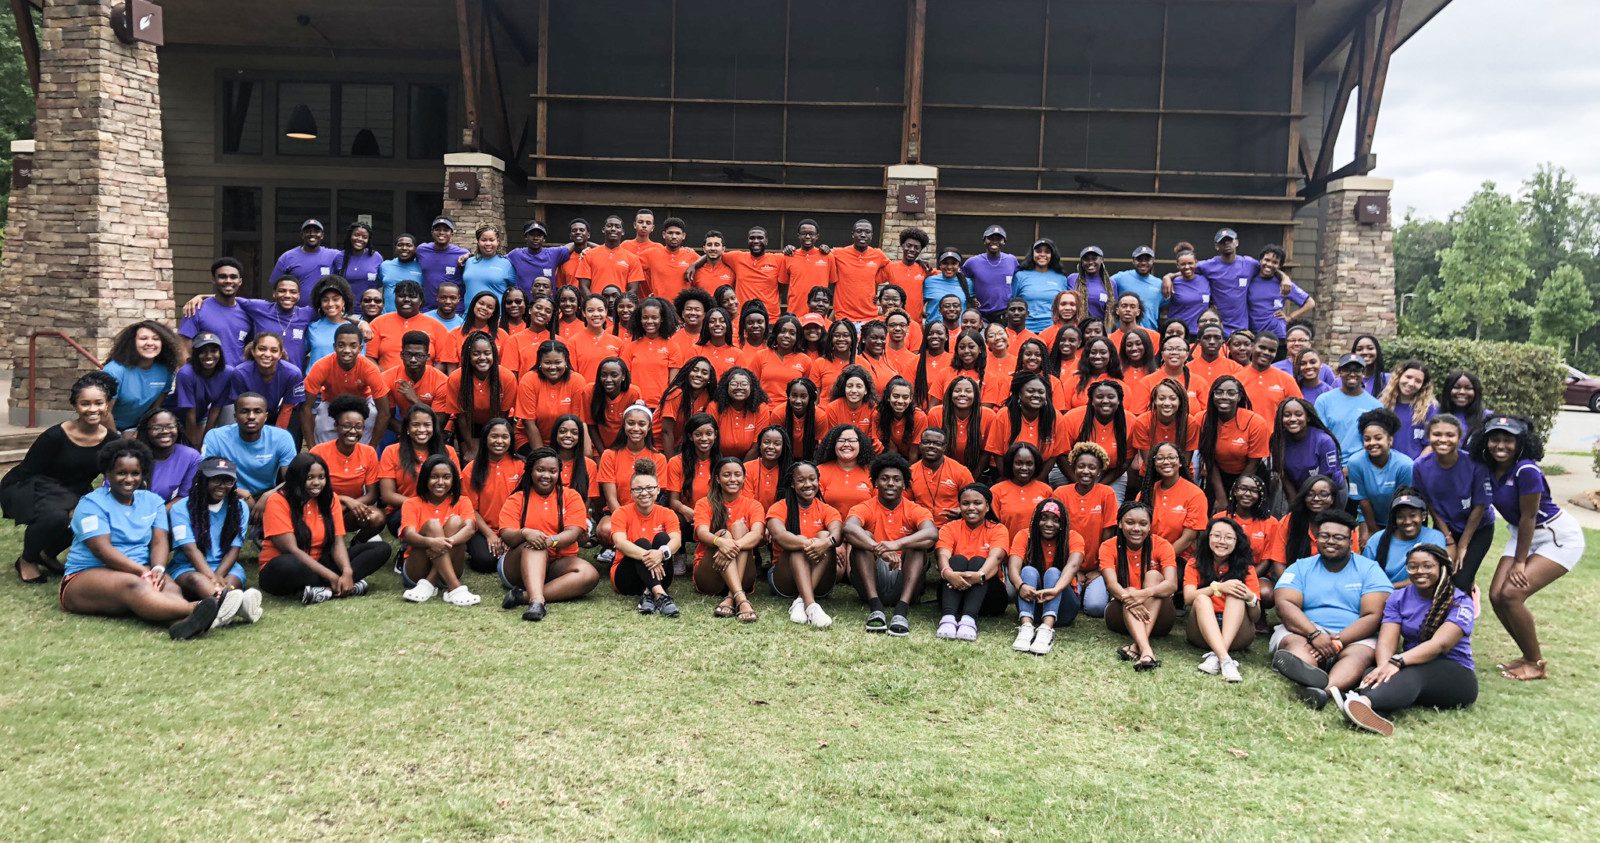 Mentors, mentees and staff making up the 2019-20 CONNECTIONS program for underrepresented students during an annual retreat